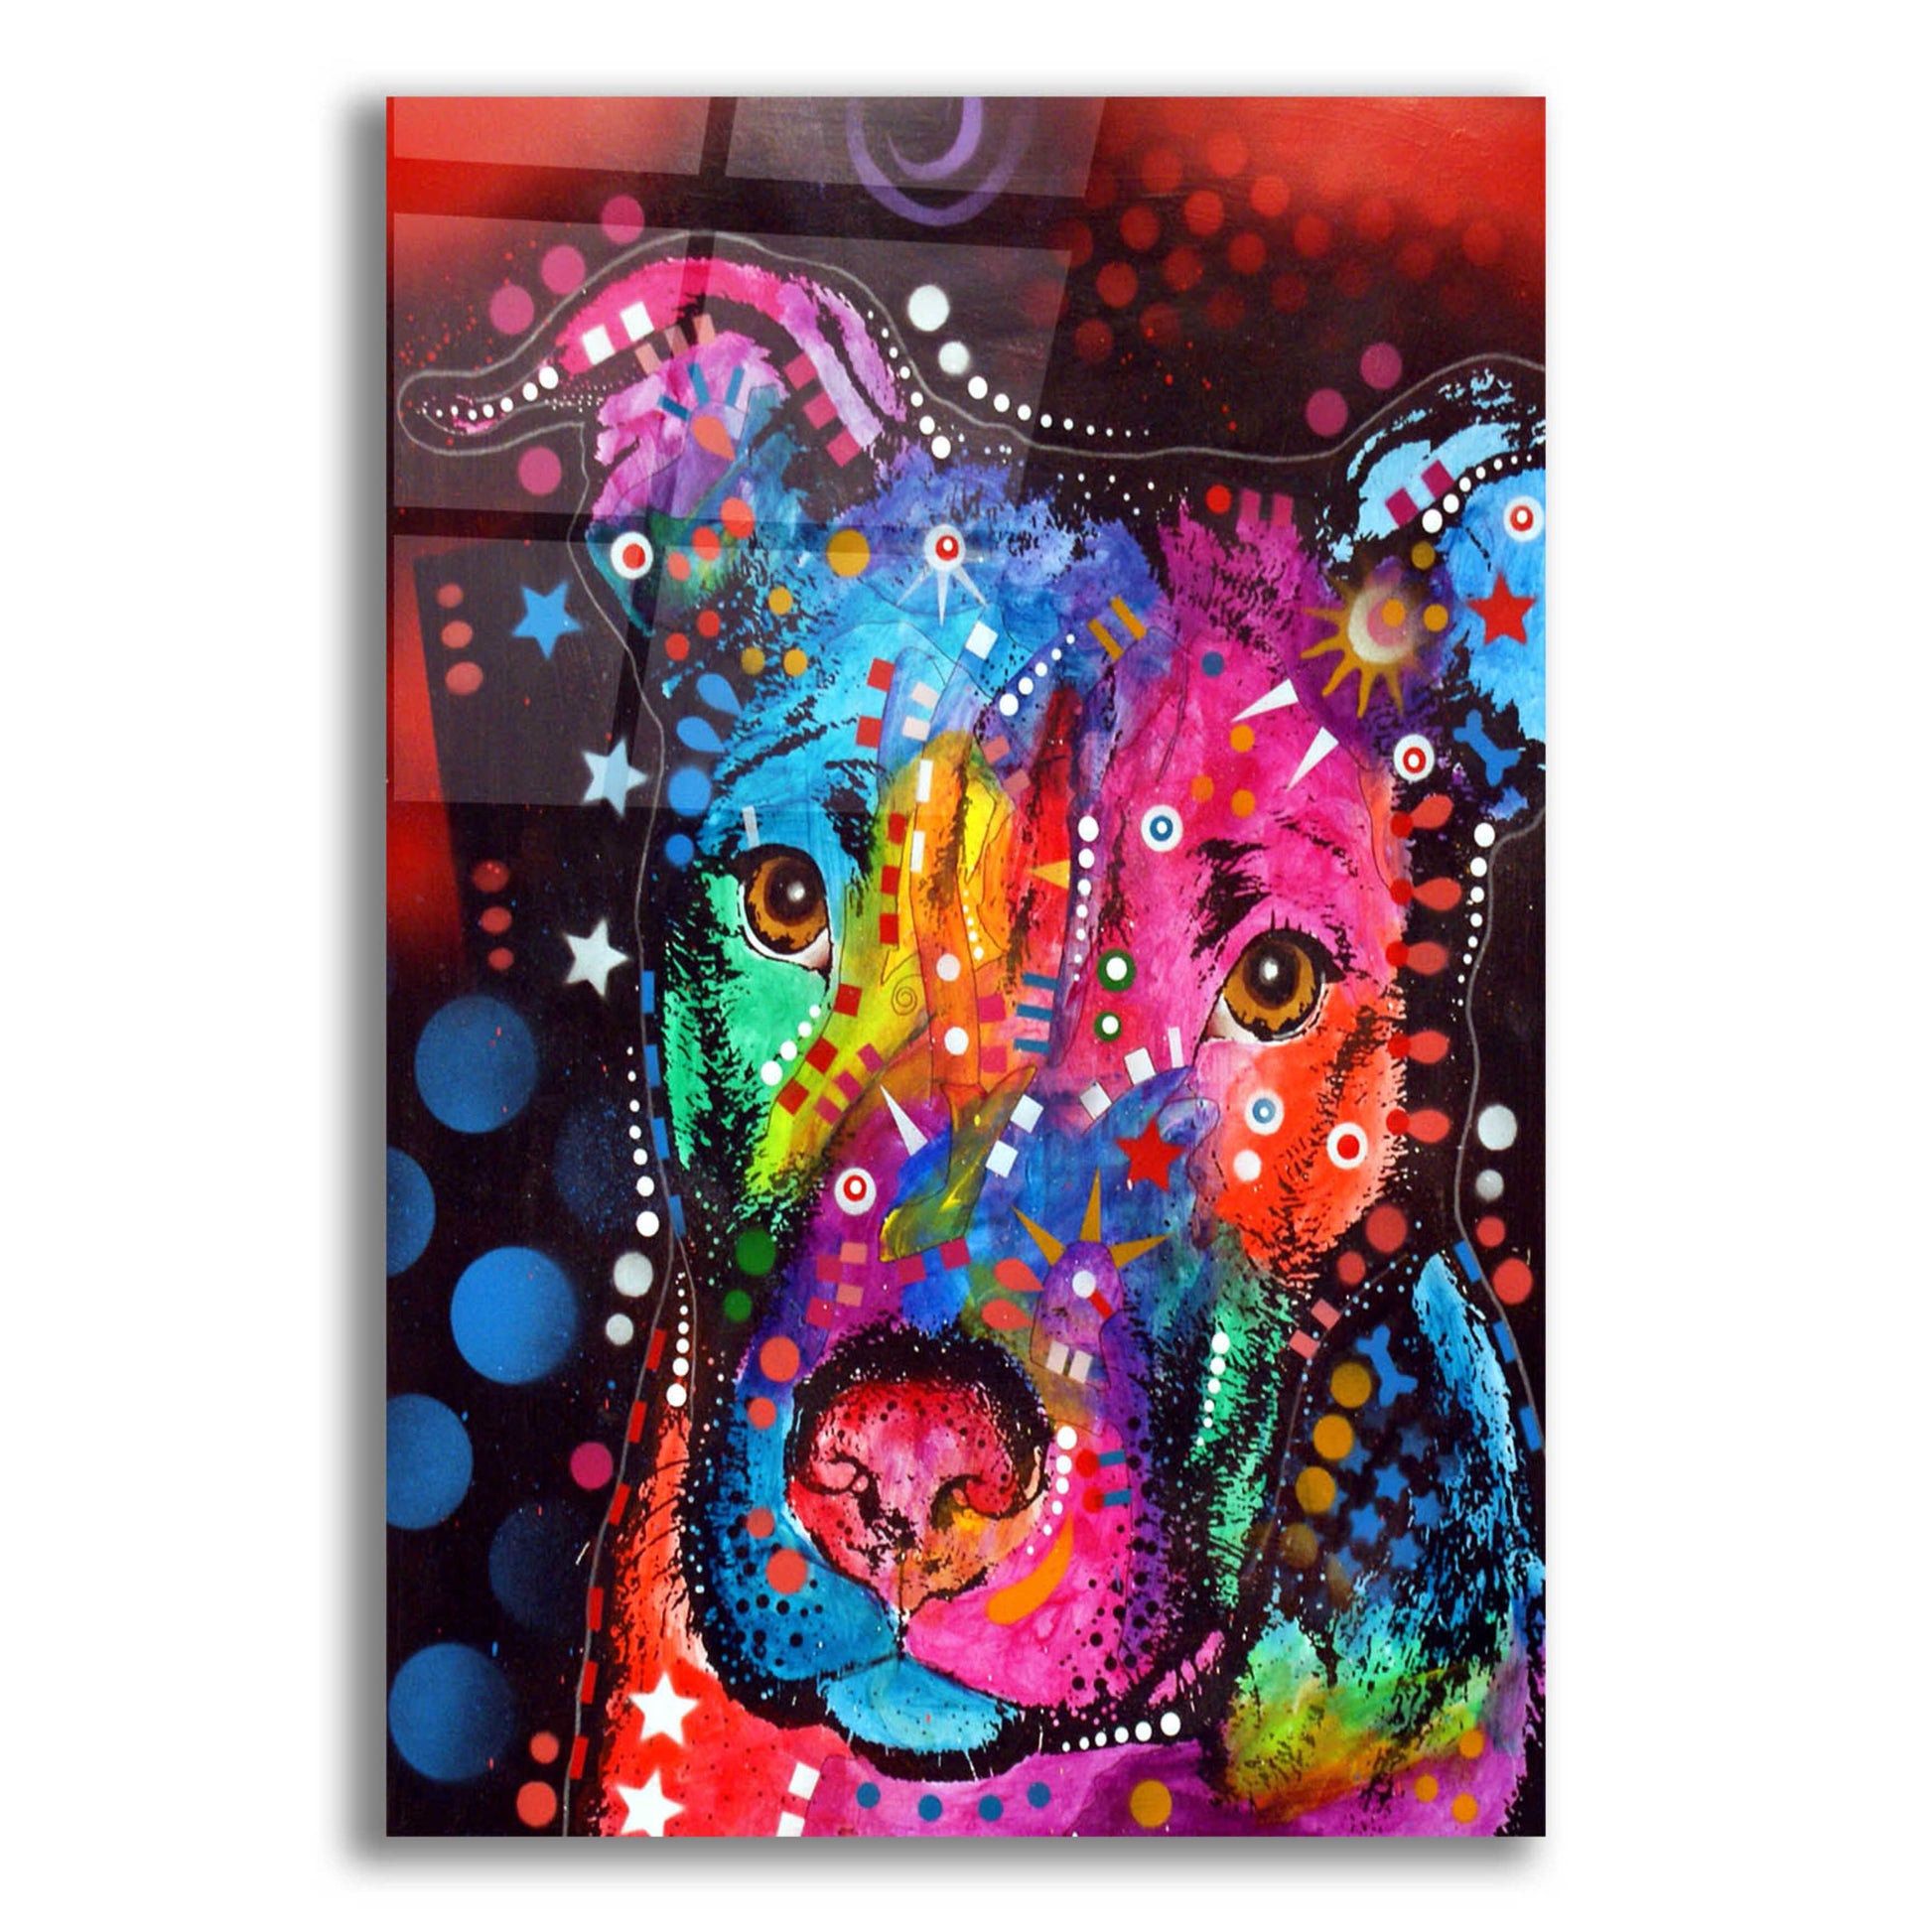 Epic Art 'Young Bull 120610' by Dean Russo, Acrylic Glass Wall Art,12x16